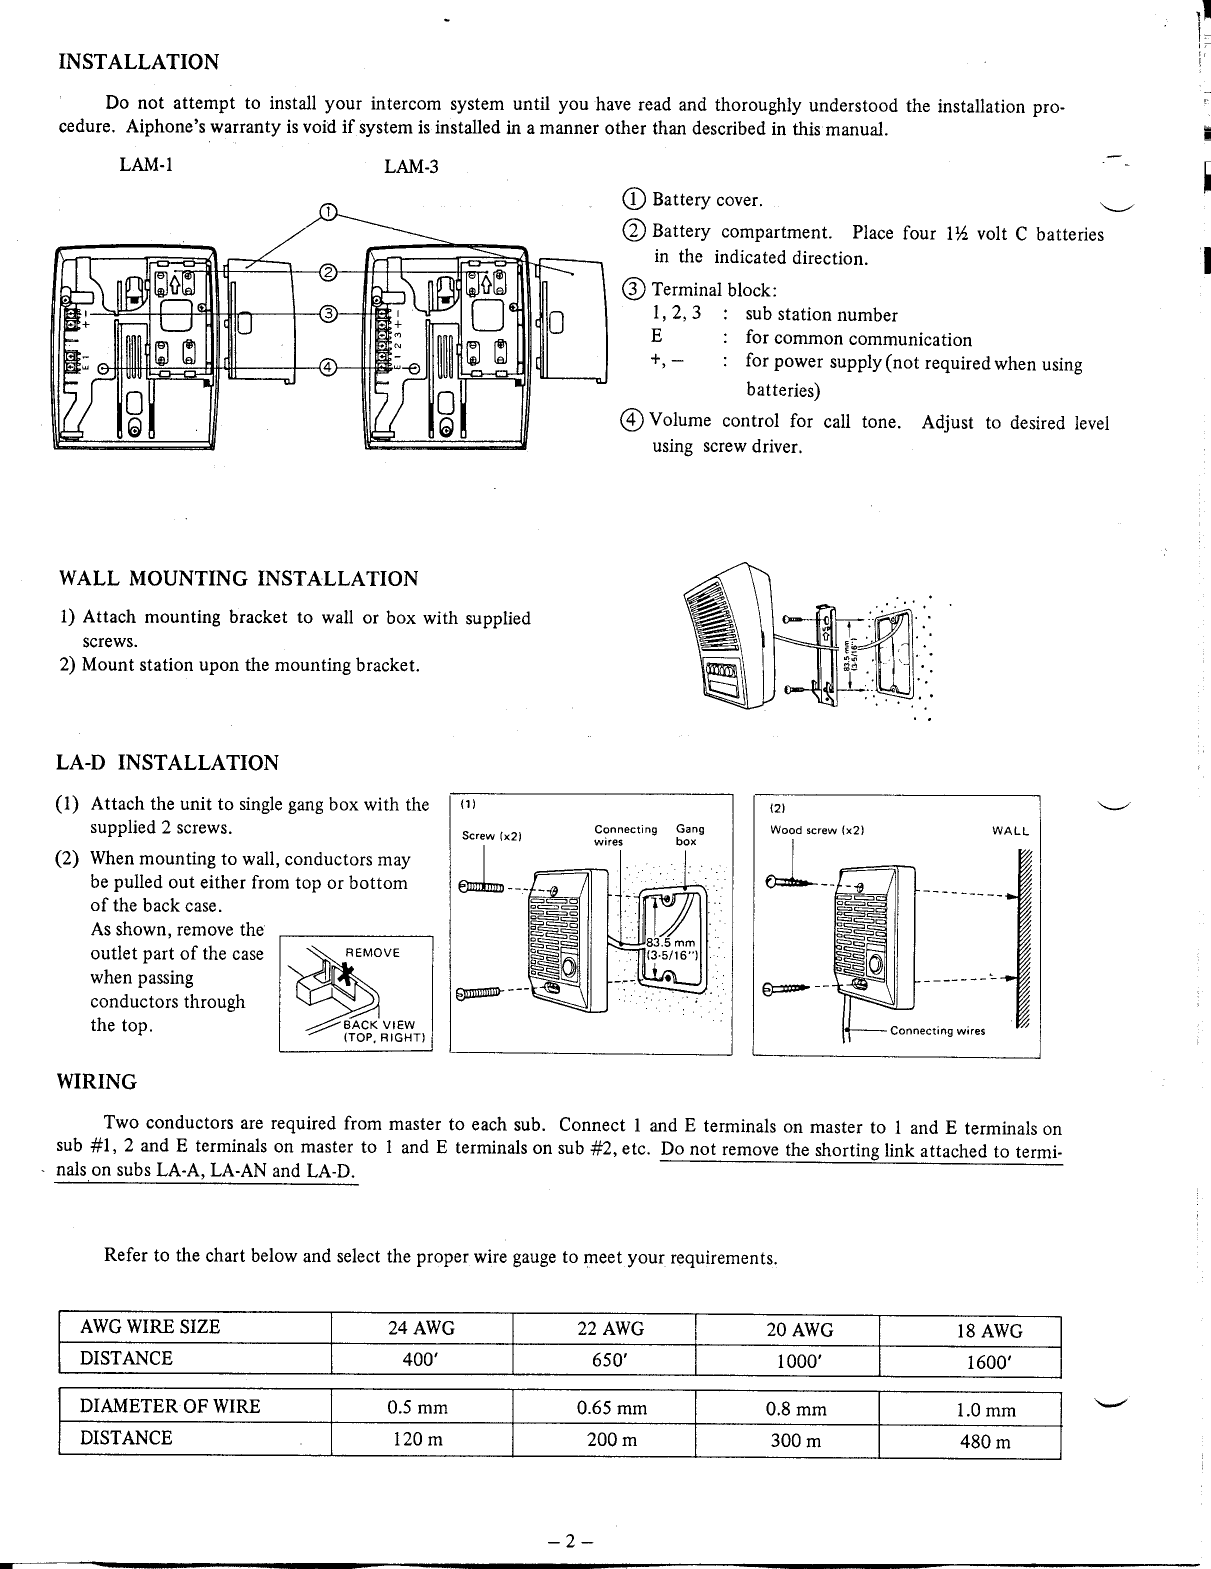 Page 2 of 4 - Aiphone LAM-3 User Manual  To The 93676d8d-2ada-44b3-90bc-8764d76a7e35